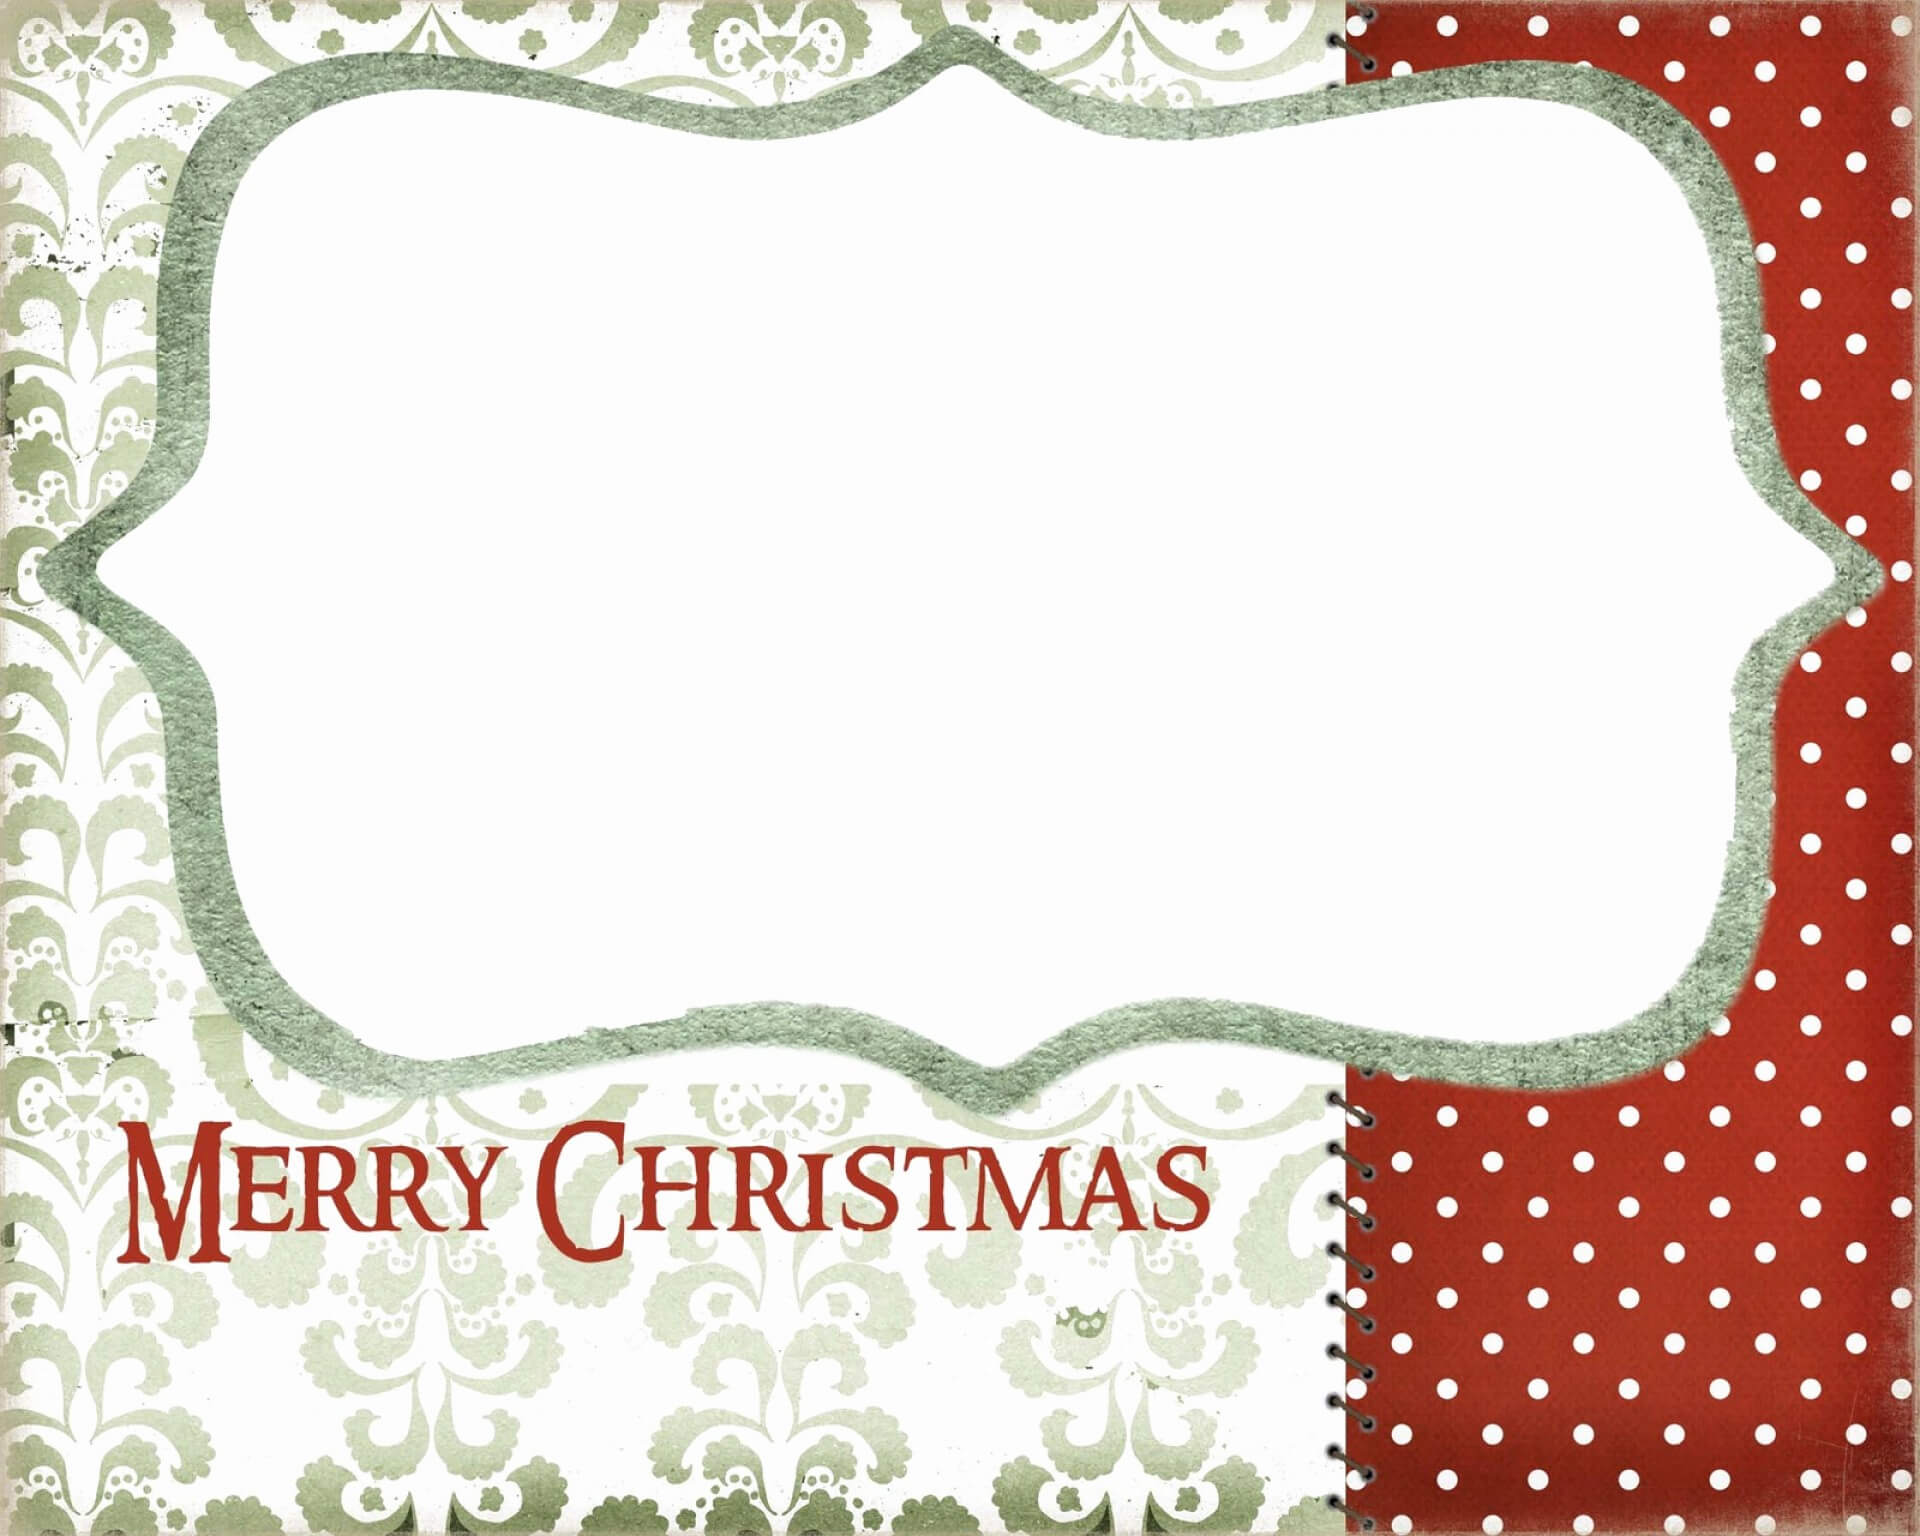 028 Christmas Photo Card Templates Template Ideas Best Intended For Free Holiday Photo Card Templates